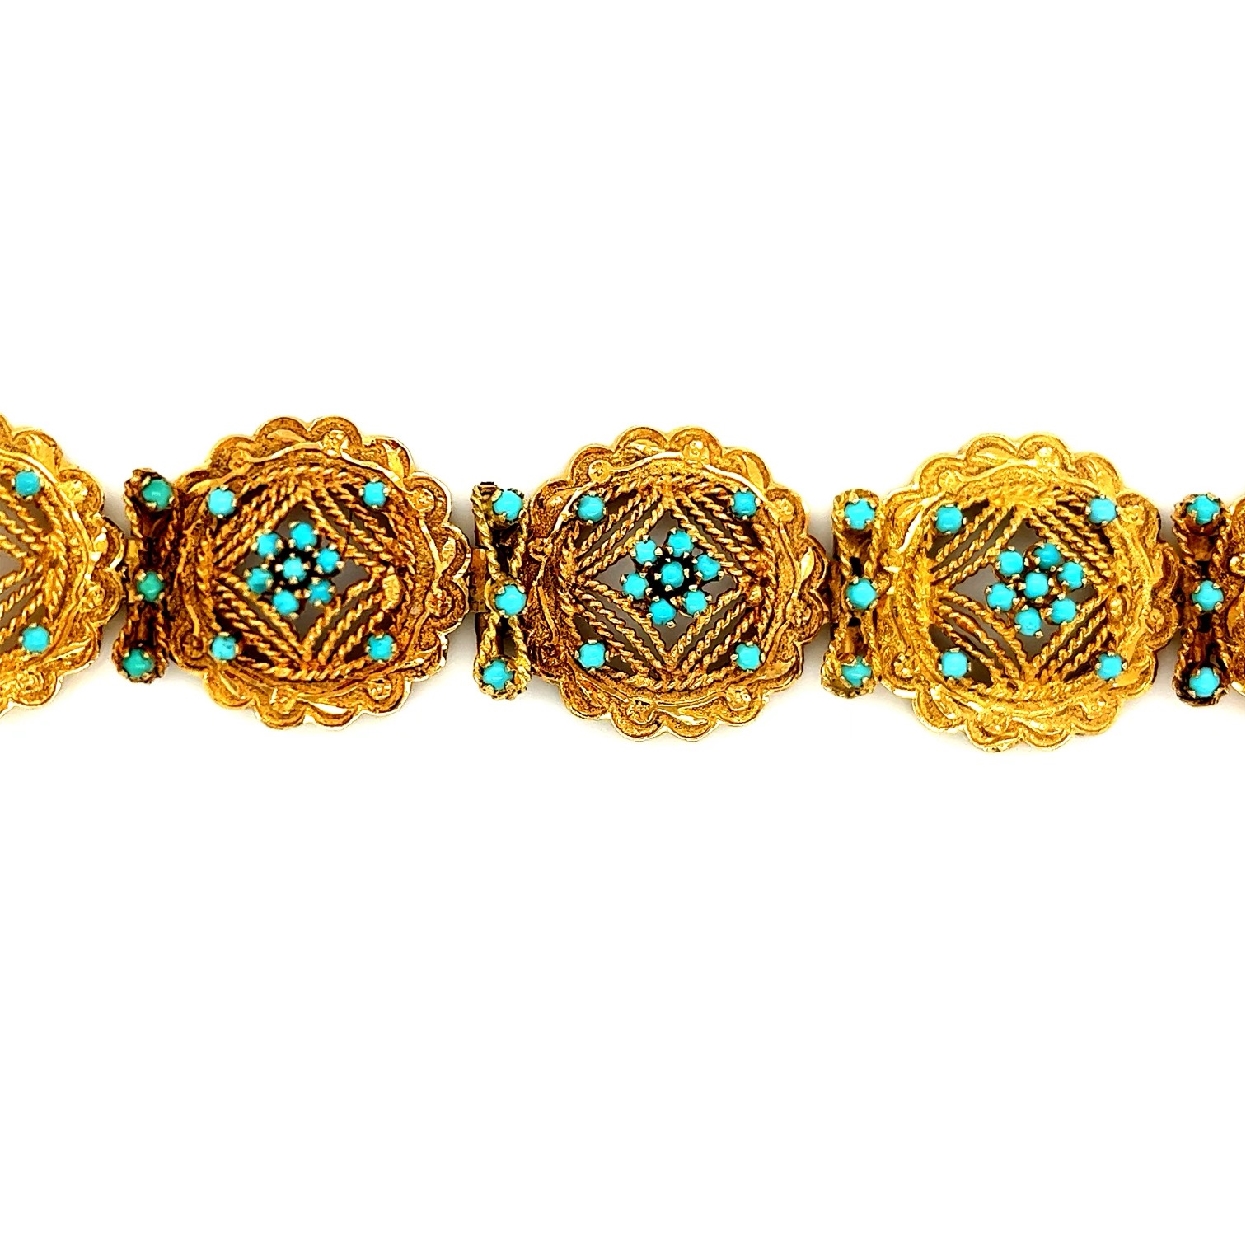 18K Yellow Gold Cast Turquoise Bracelet with a Bright Finsih

98 Rose Cabochon Cut Natural Turquoise 3.92ct